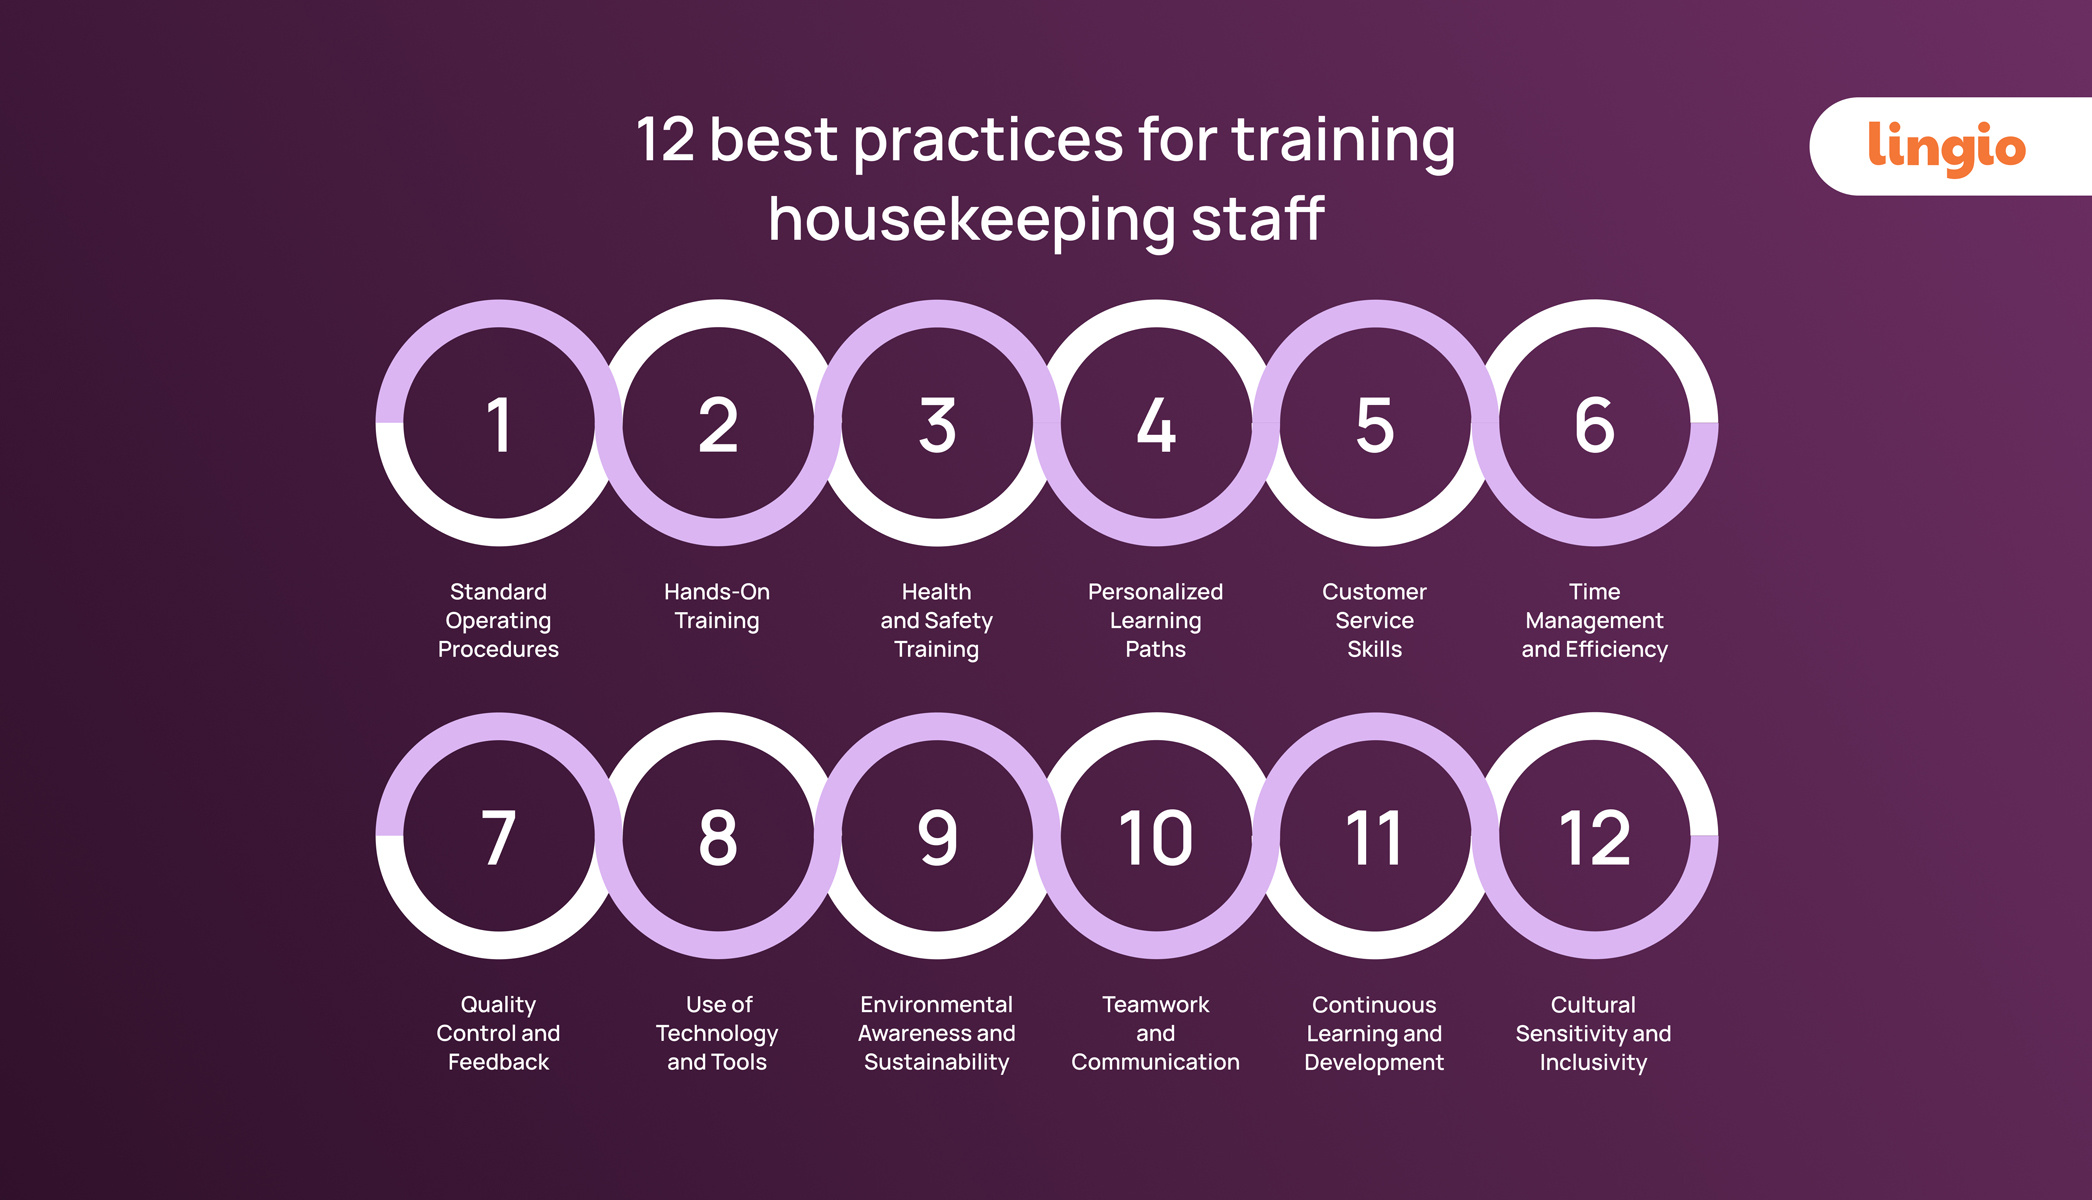 12. AI-How-To-Train-Housekeeping-Staff-12-Best-Practices-1